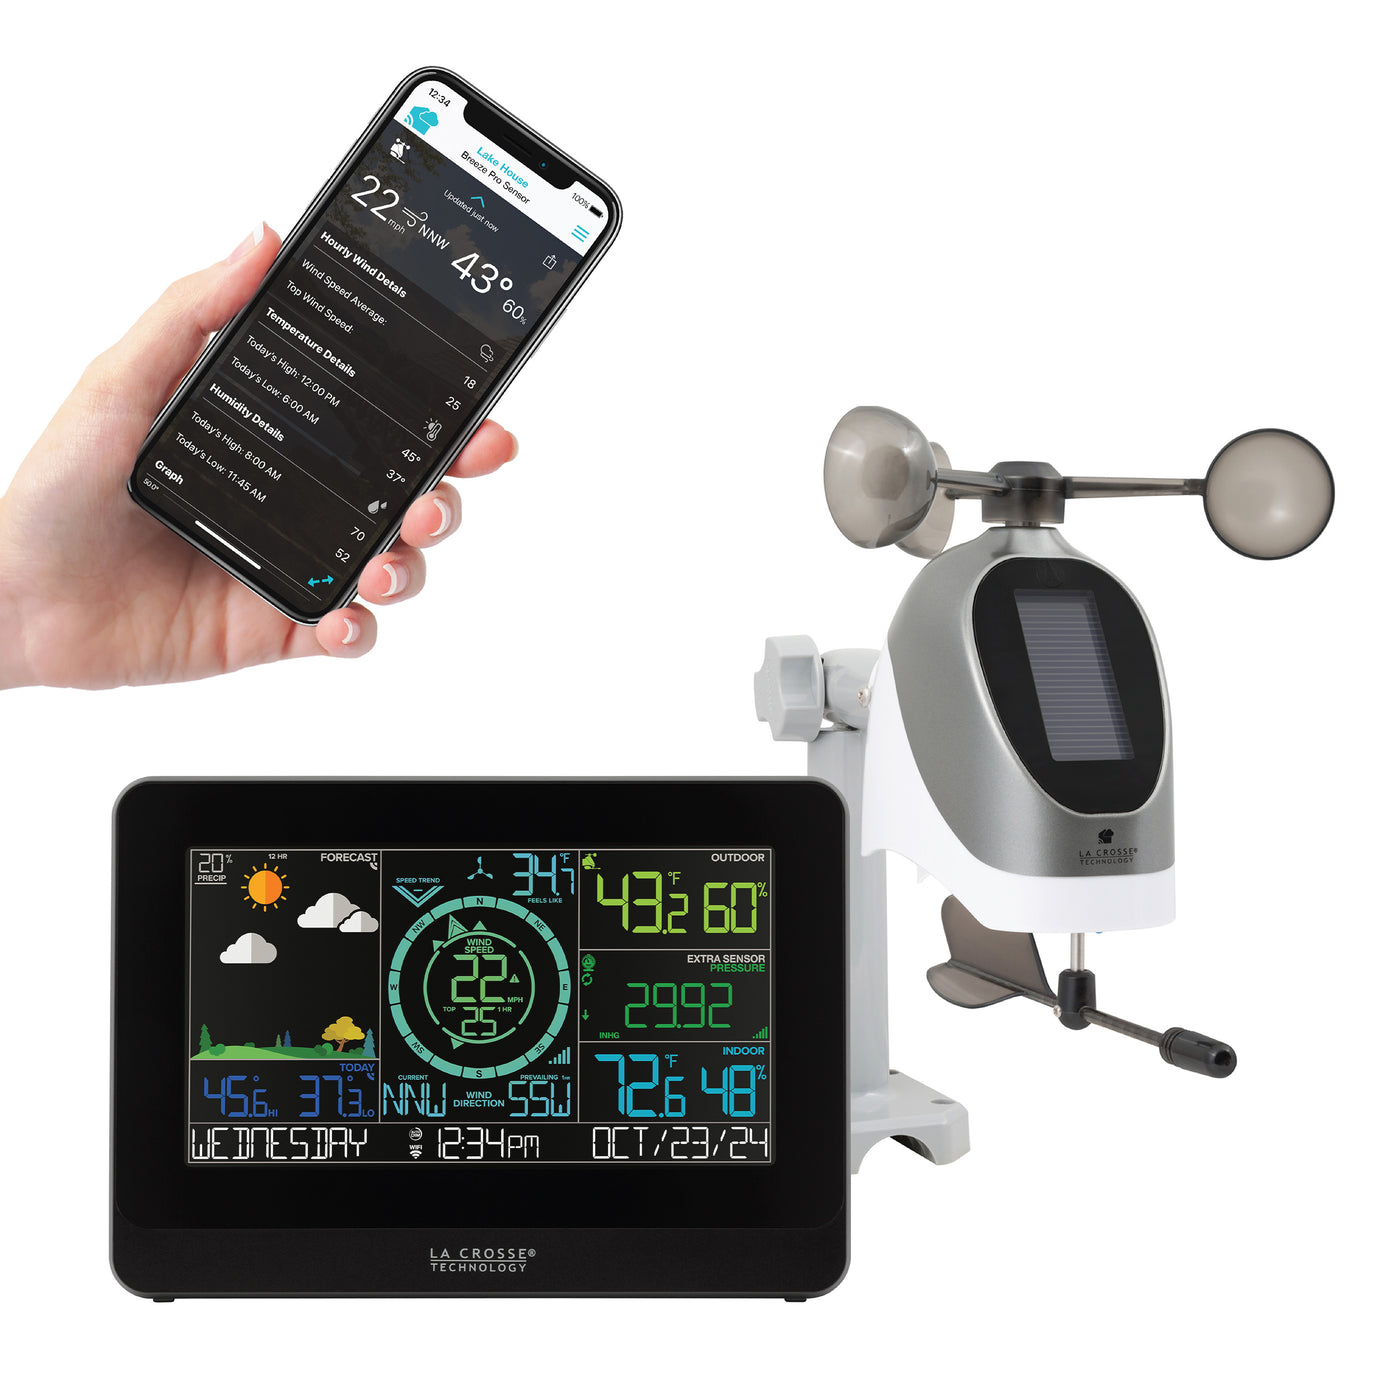 V50 Wi-Fi Wind and Weather Station